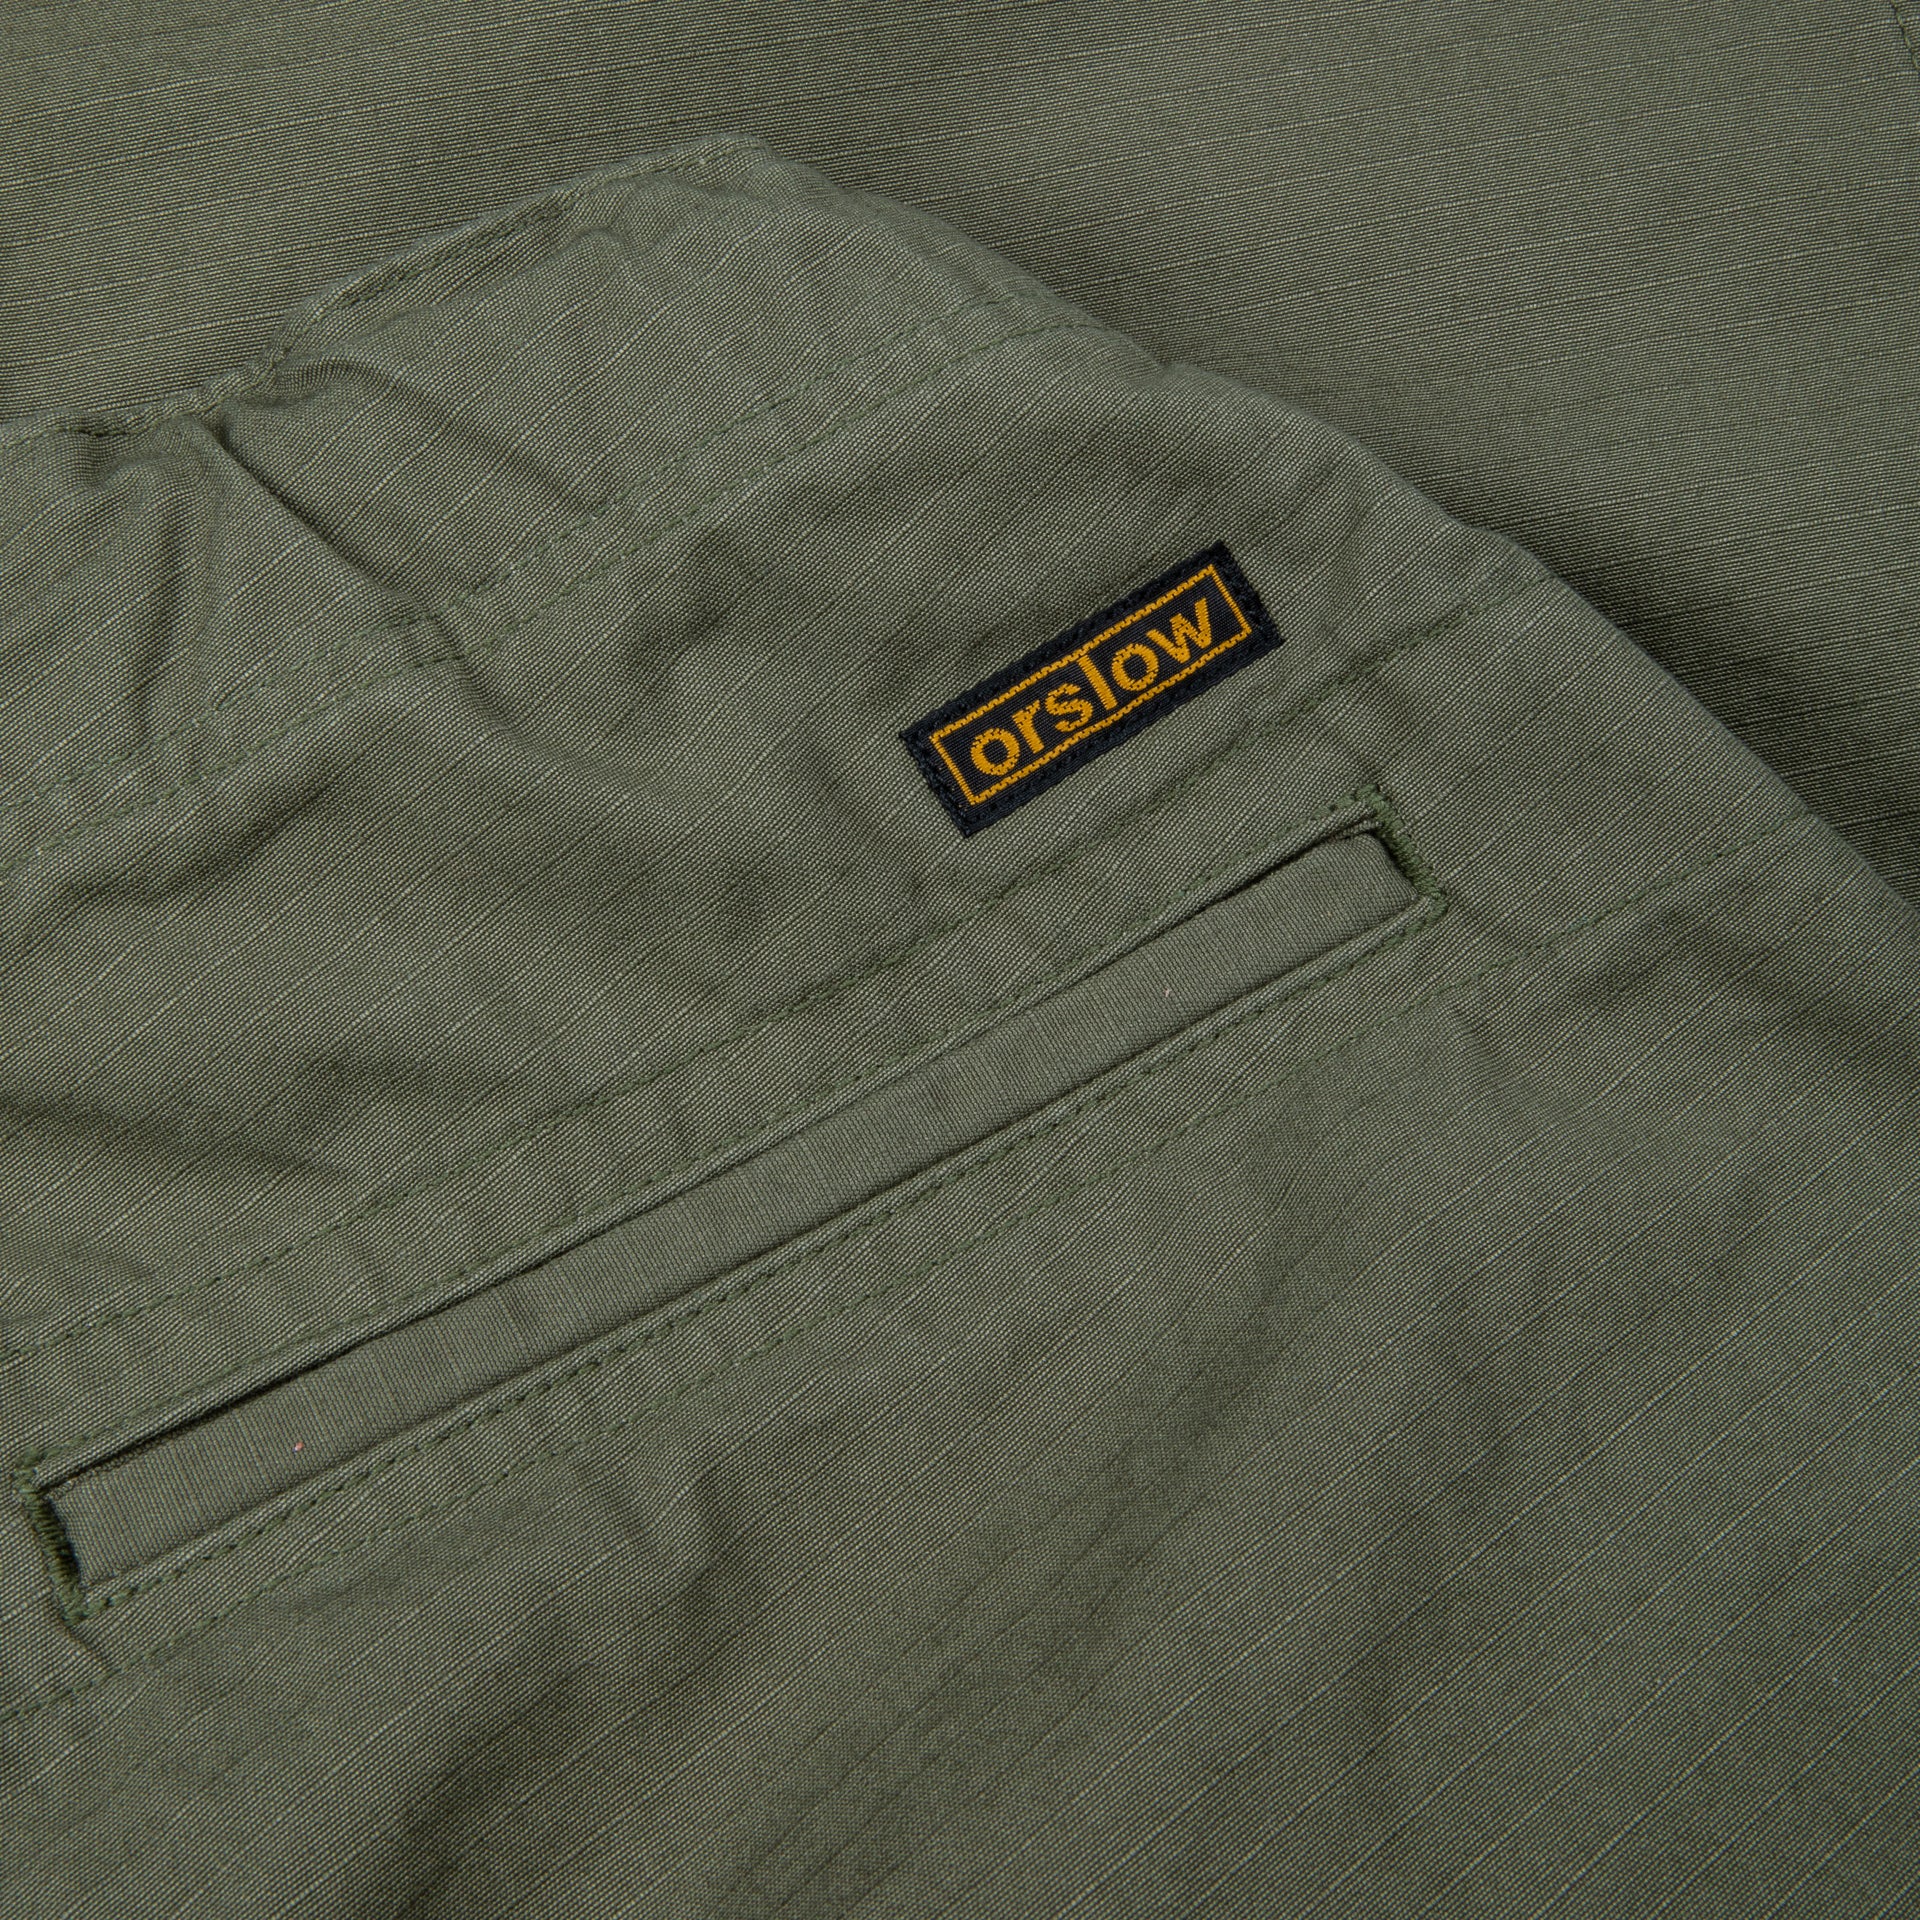 Orslow 03-1002 Unisex New Yorker pants army